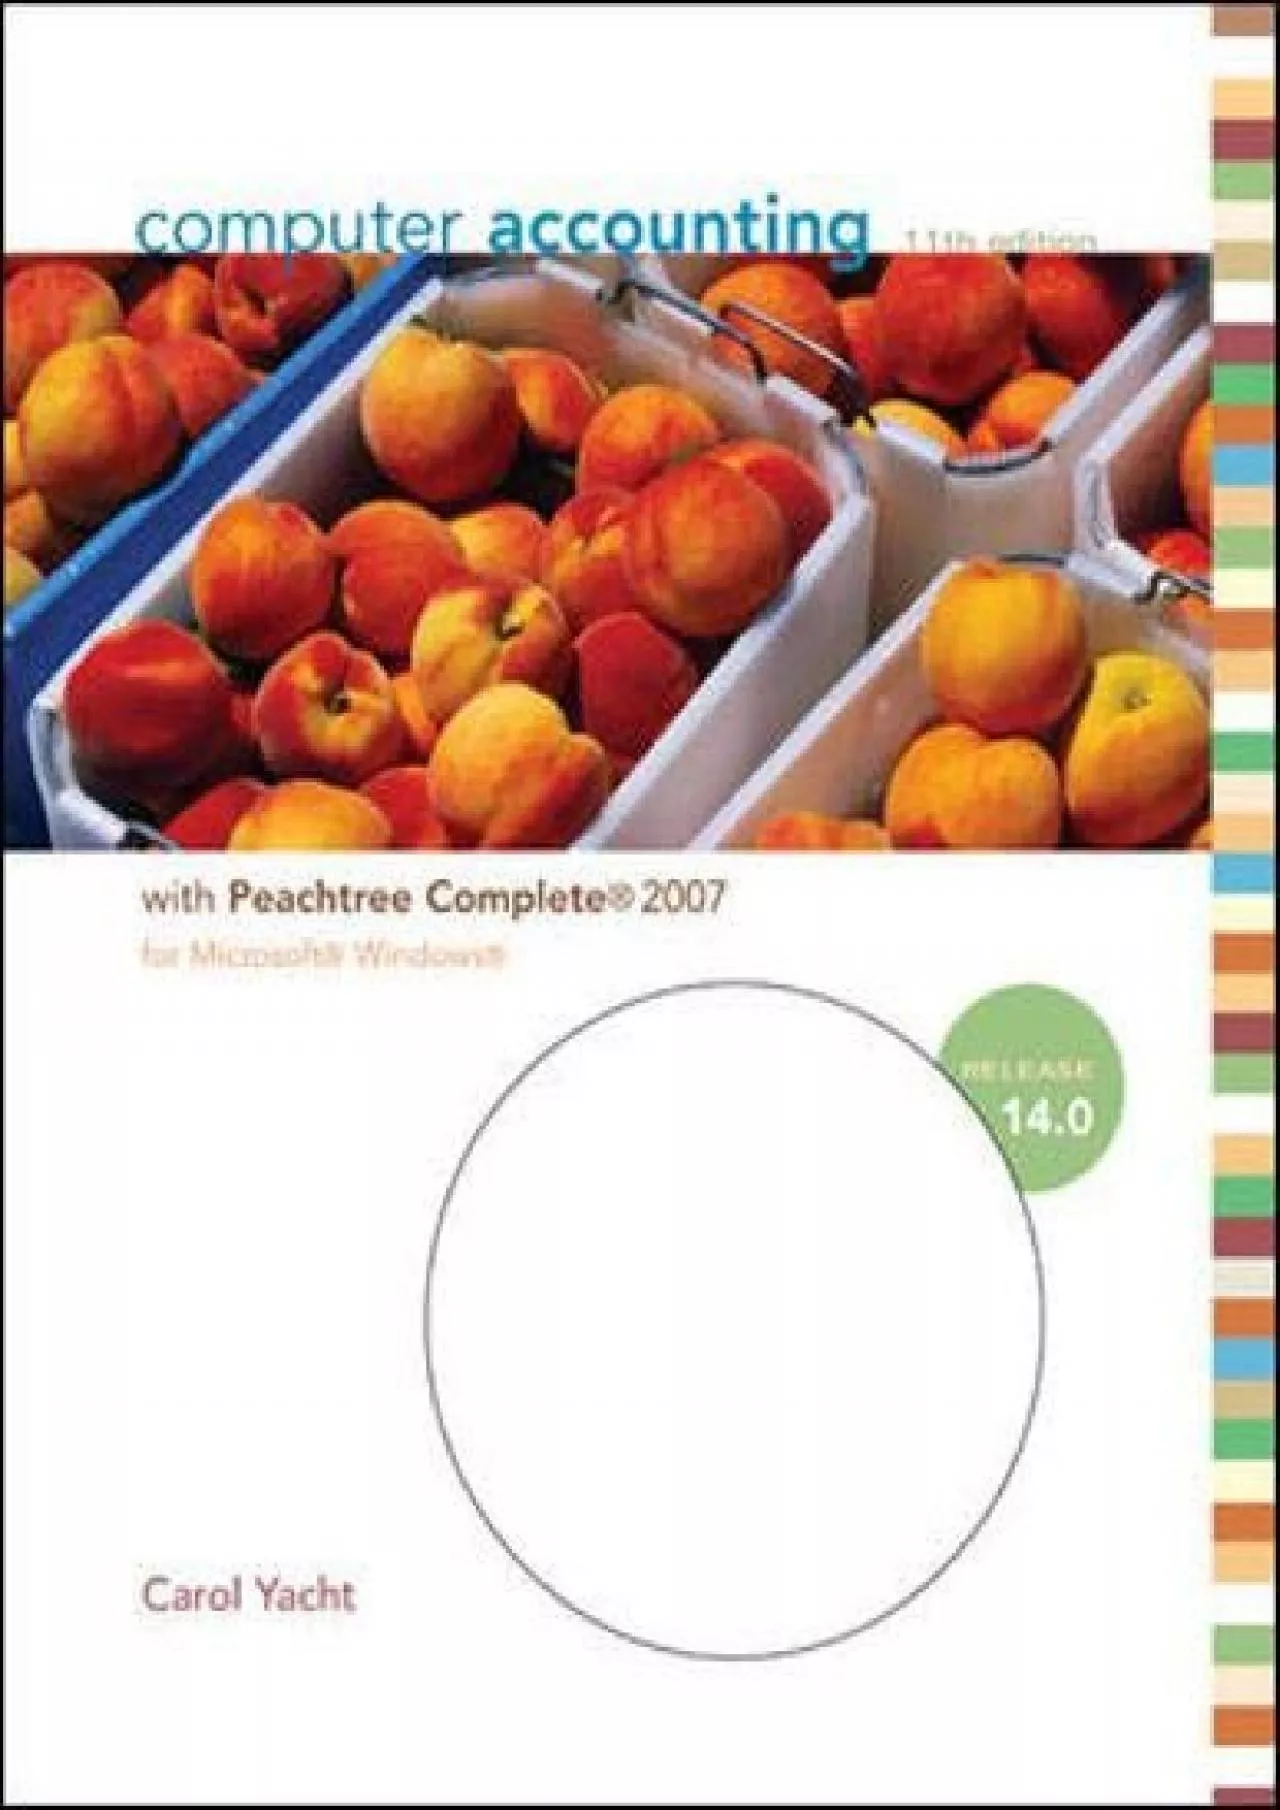 (EBOOK)-COMPUTER ACCOUNTING WITH PEACHTREE COMPLETE 2007, RELEASE 14.0 WITH SOFTWARE CD-ROM,